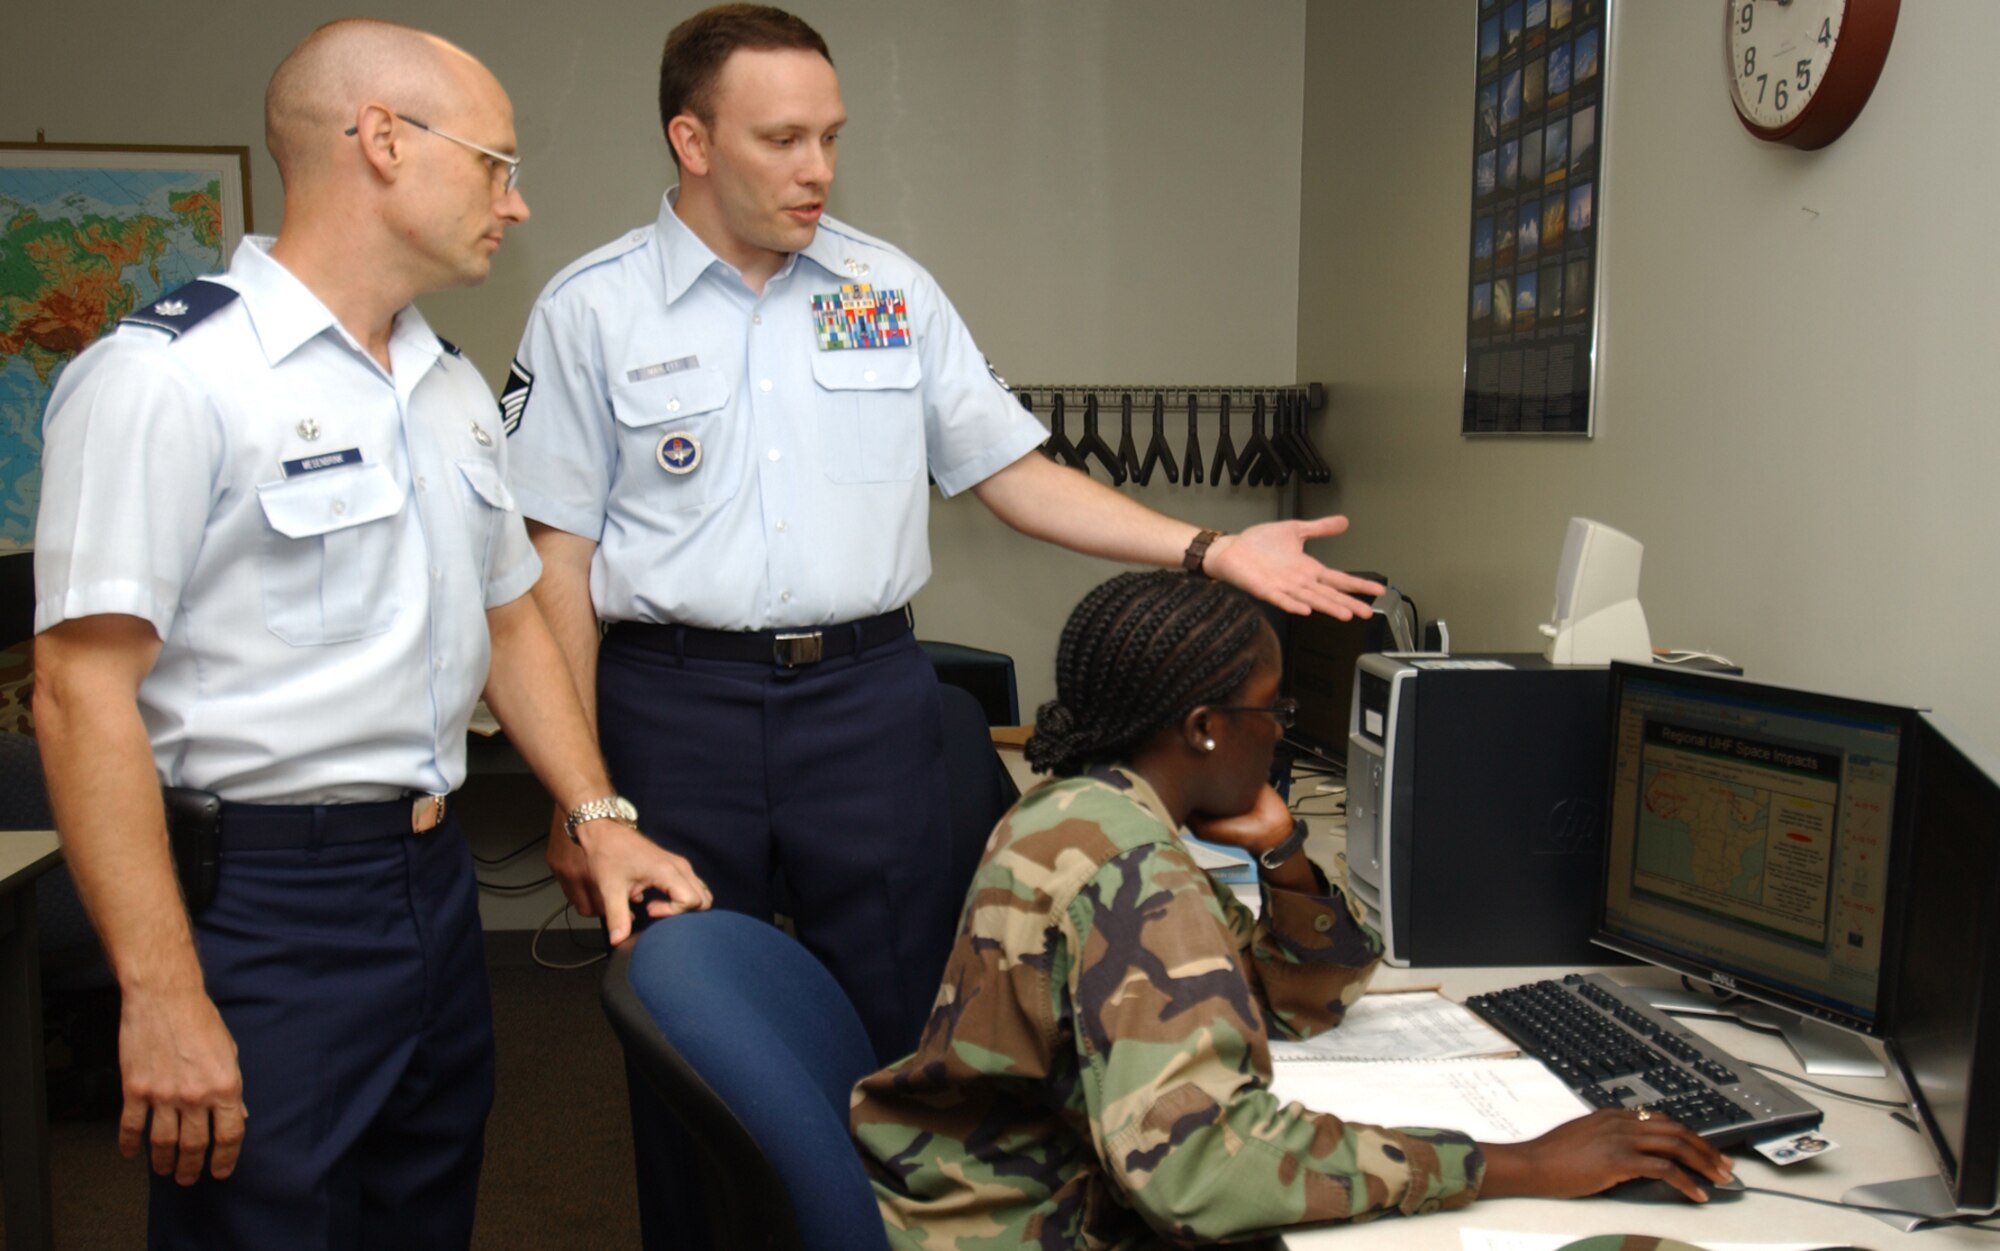 Lt. Col. Mark Mesenbrink, left, 335th Training Squadron commander, is briefed by  Master Sgt. Robert Marlett, 335th TRS instructor supervisor, on the combat weather team operations course.  The student is 1st Lt. Martine Morris.  Colonel Mesenbrink took command of the 335th TRS from Lt. Col. Elia Sanjume July 12.  (U.S. Air Force photo by Kemberly Groue)